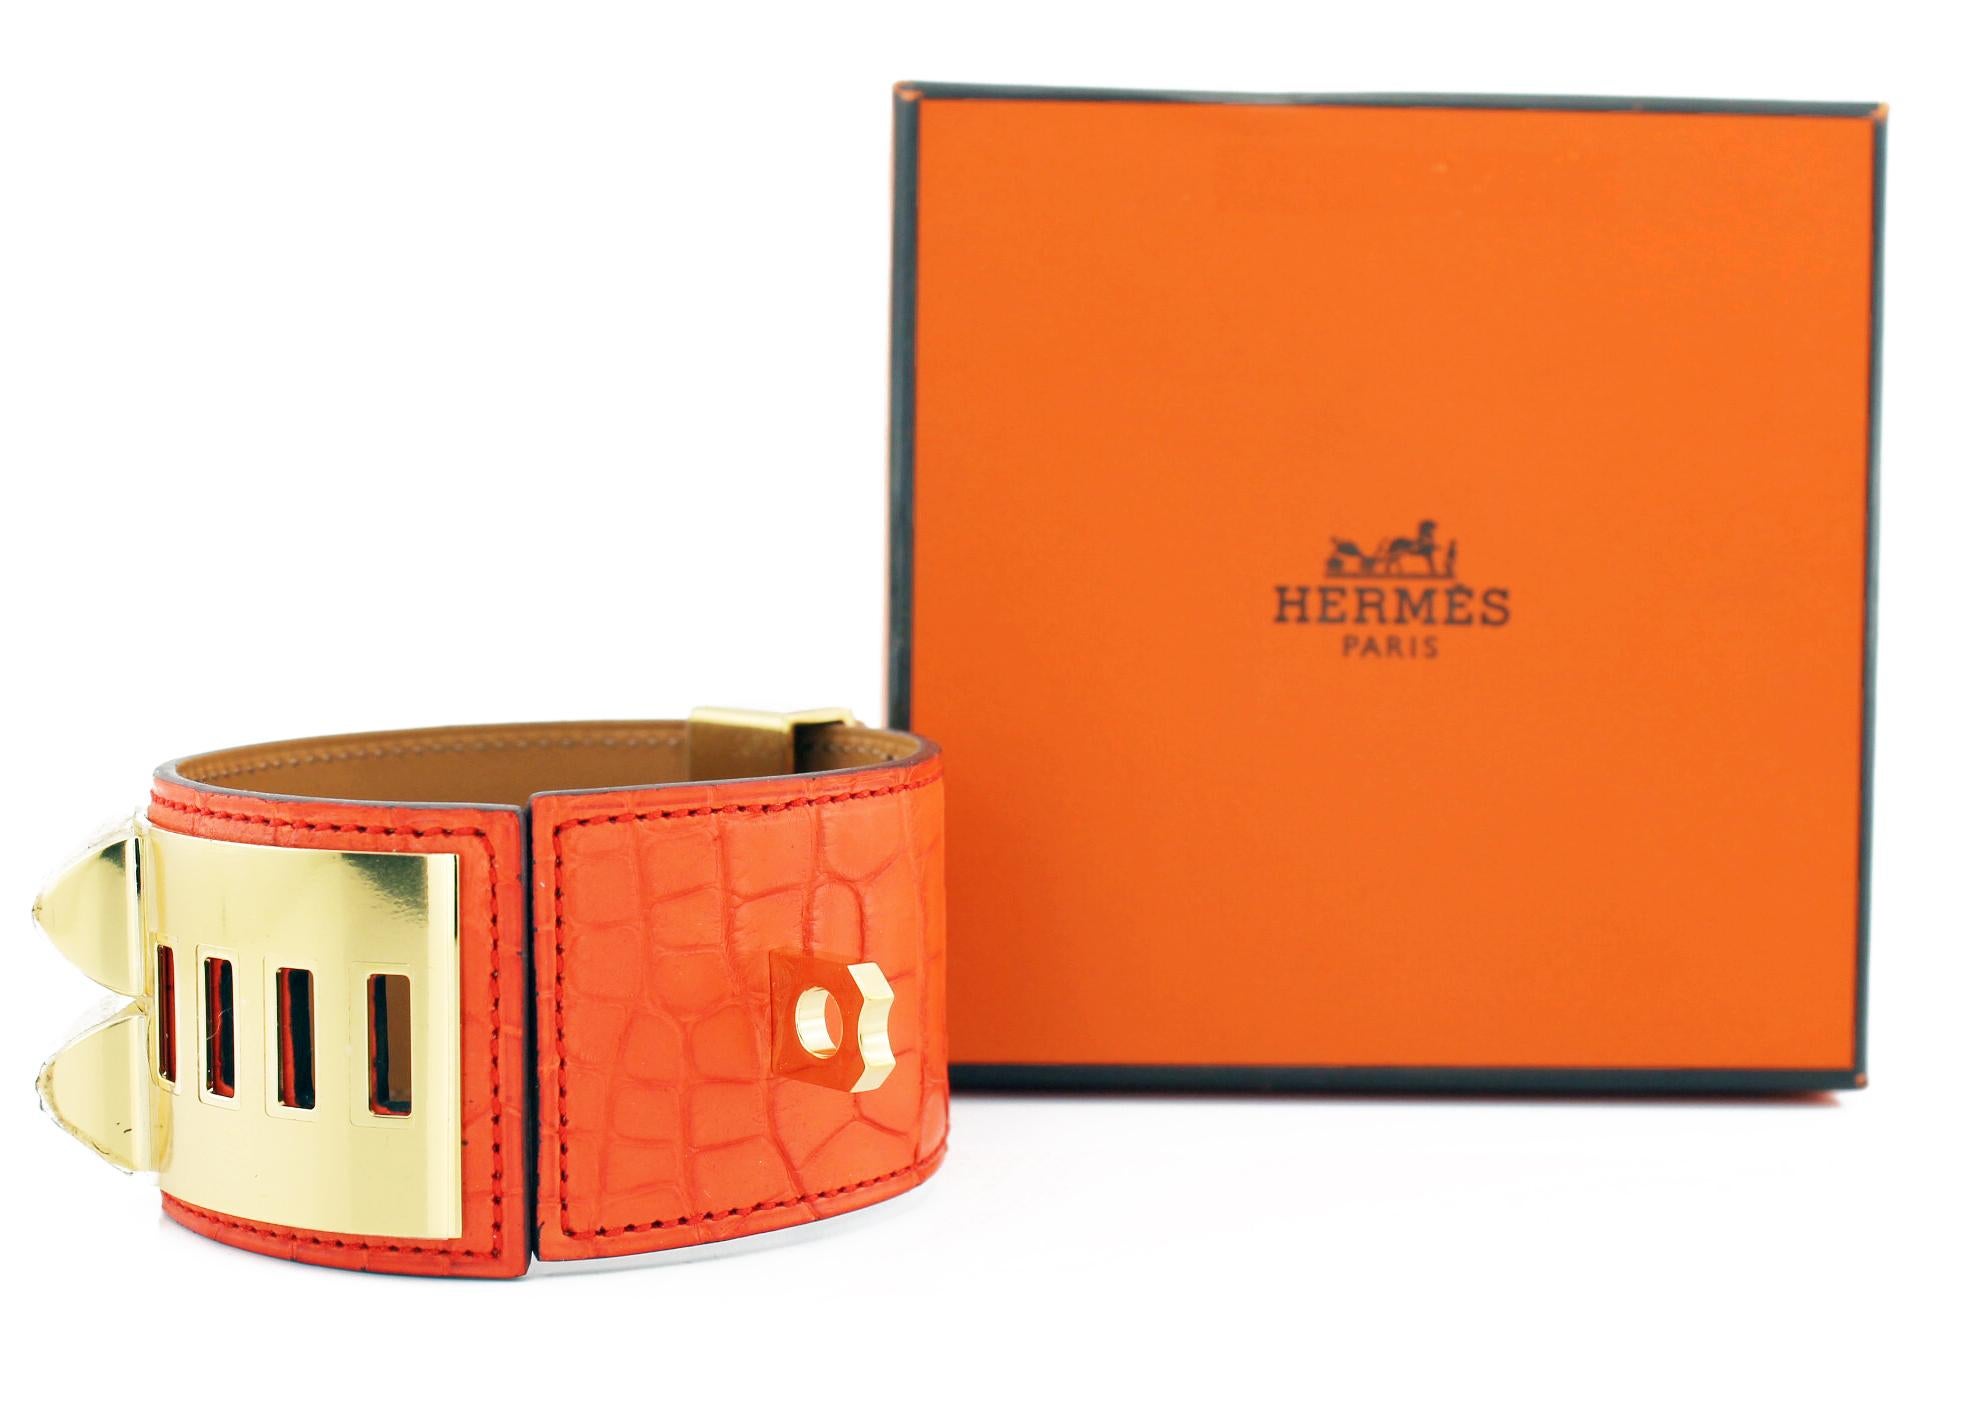 Hermes Collier De Chien Crocodile Cuff
Orange crocodile cuff with gold plated pyramid studs and ring
New with stickers.
Original pouch and box
Size: Small
RRP £1,700